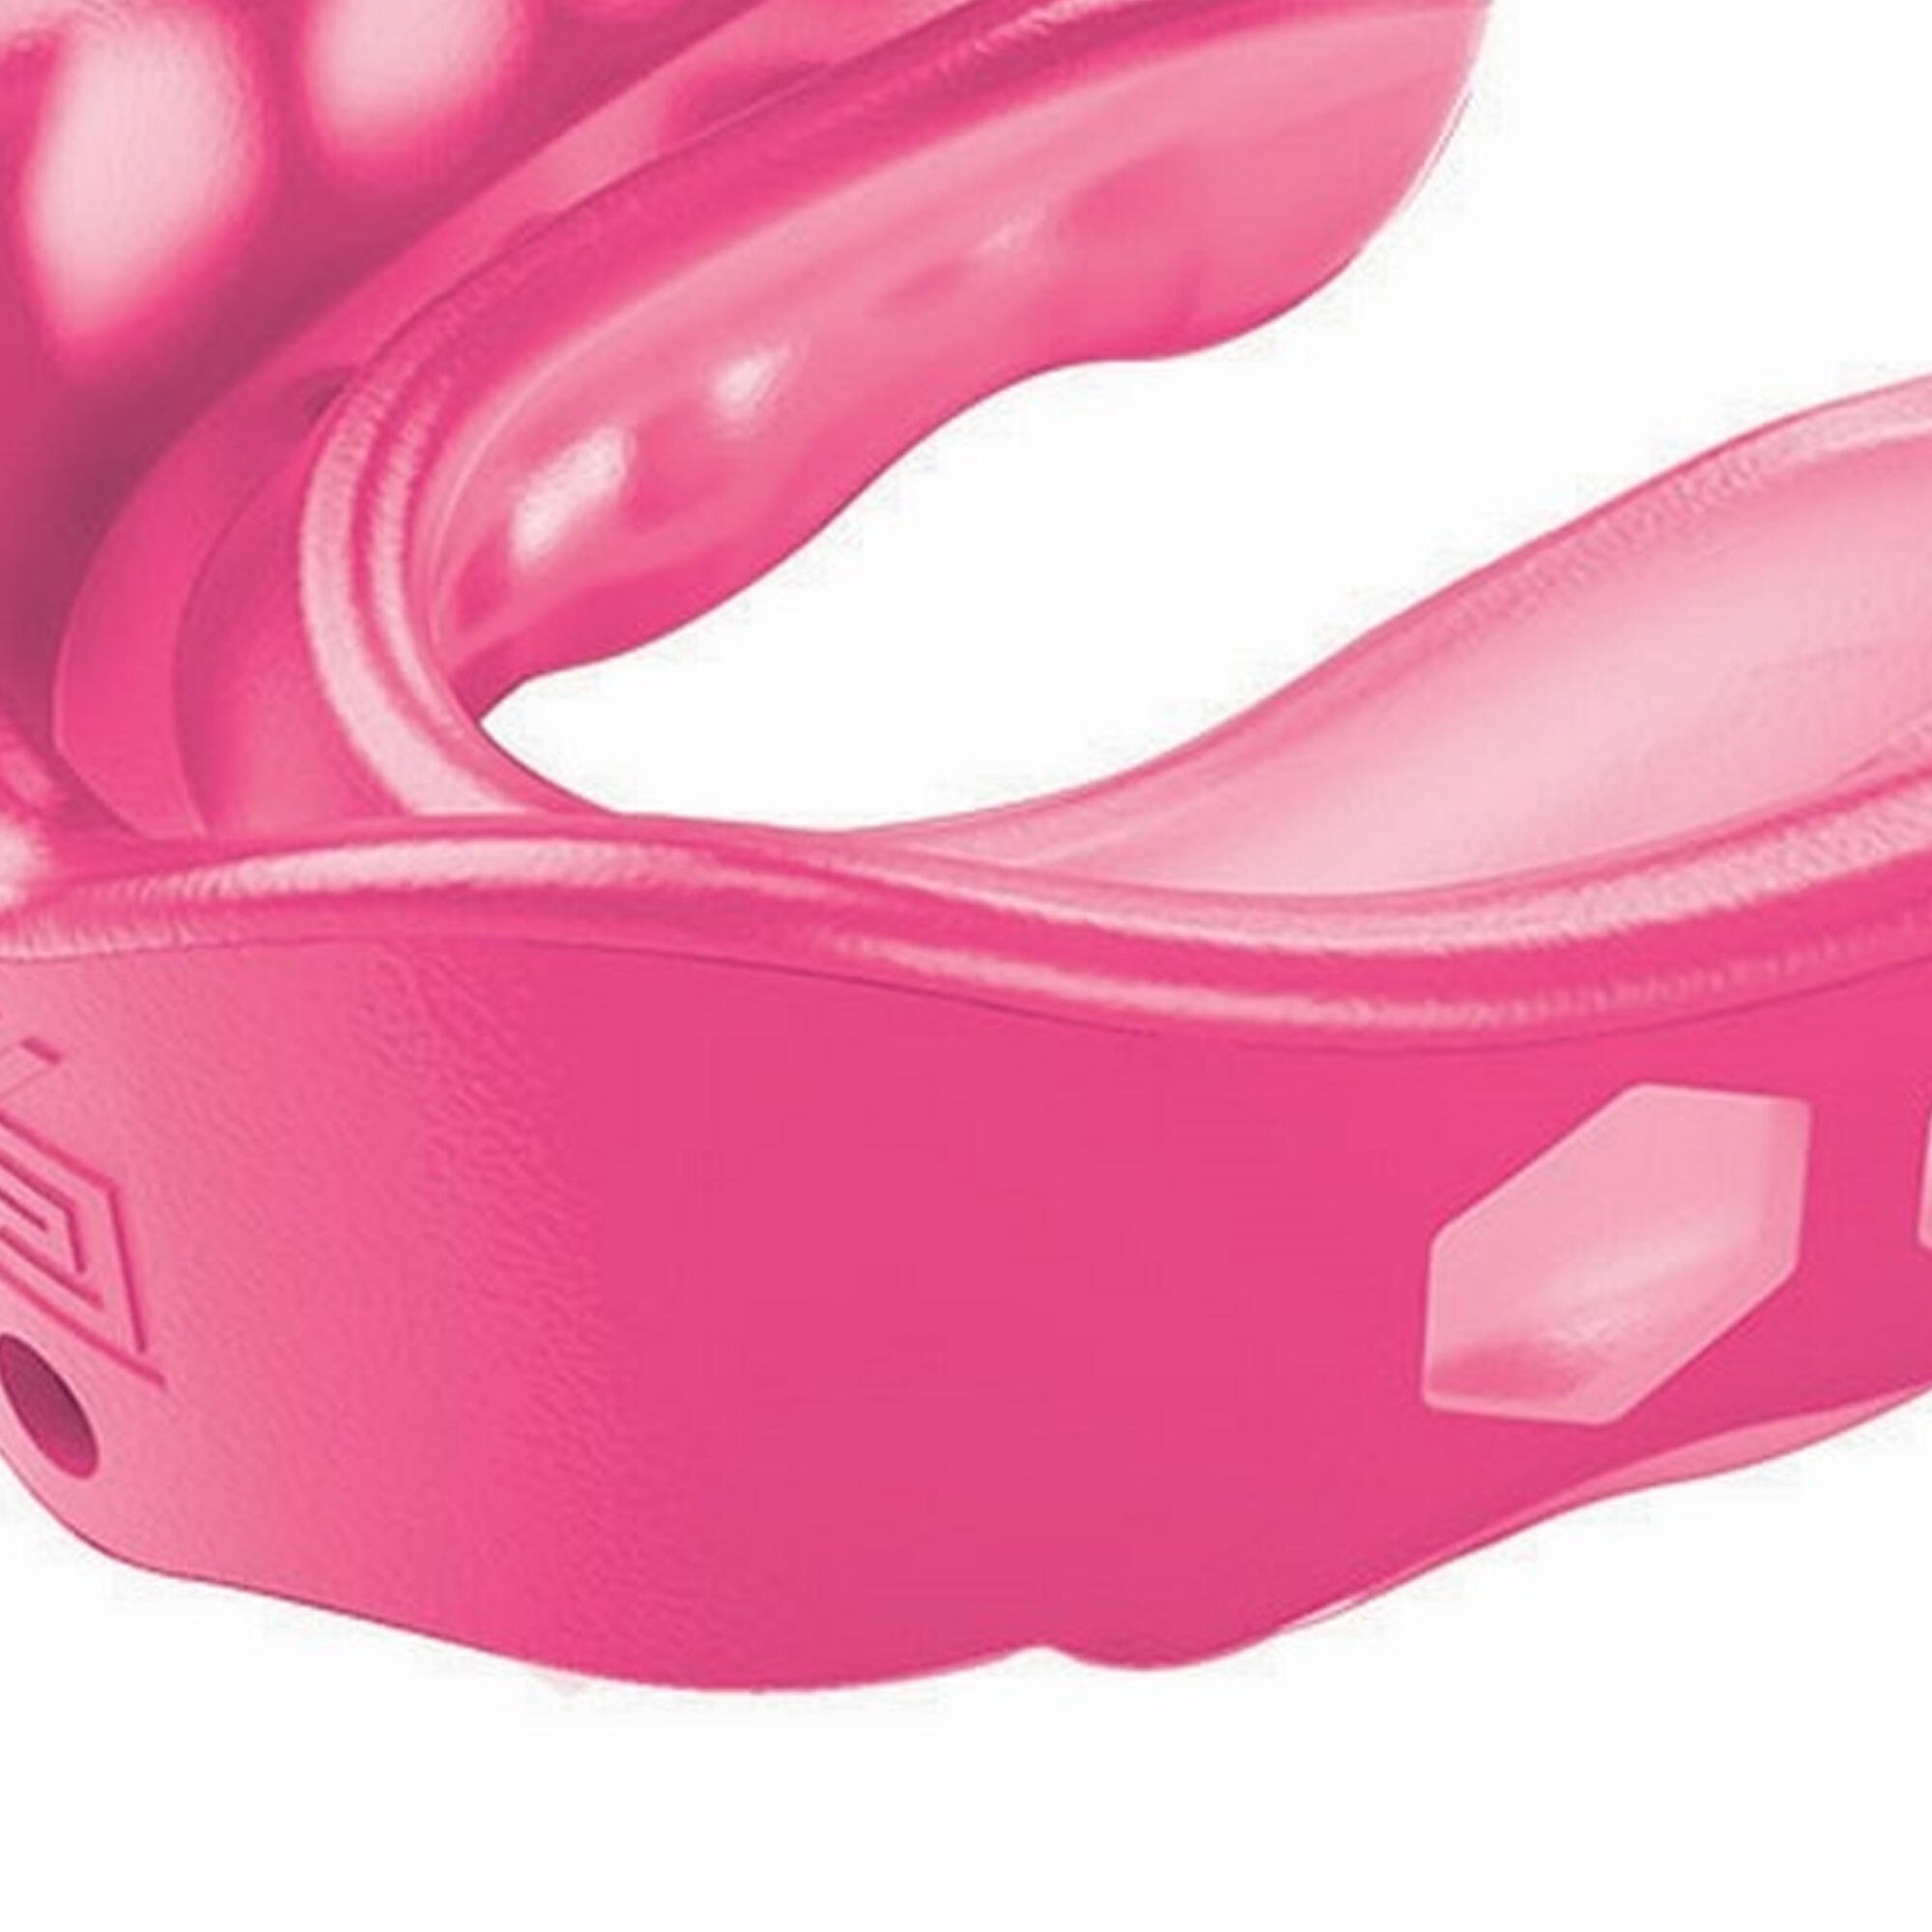 Unisex Adult Gel Max Mouthguard (Pink) 3/3